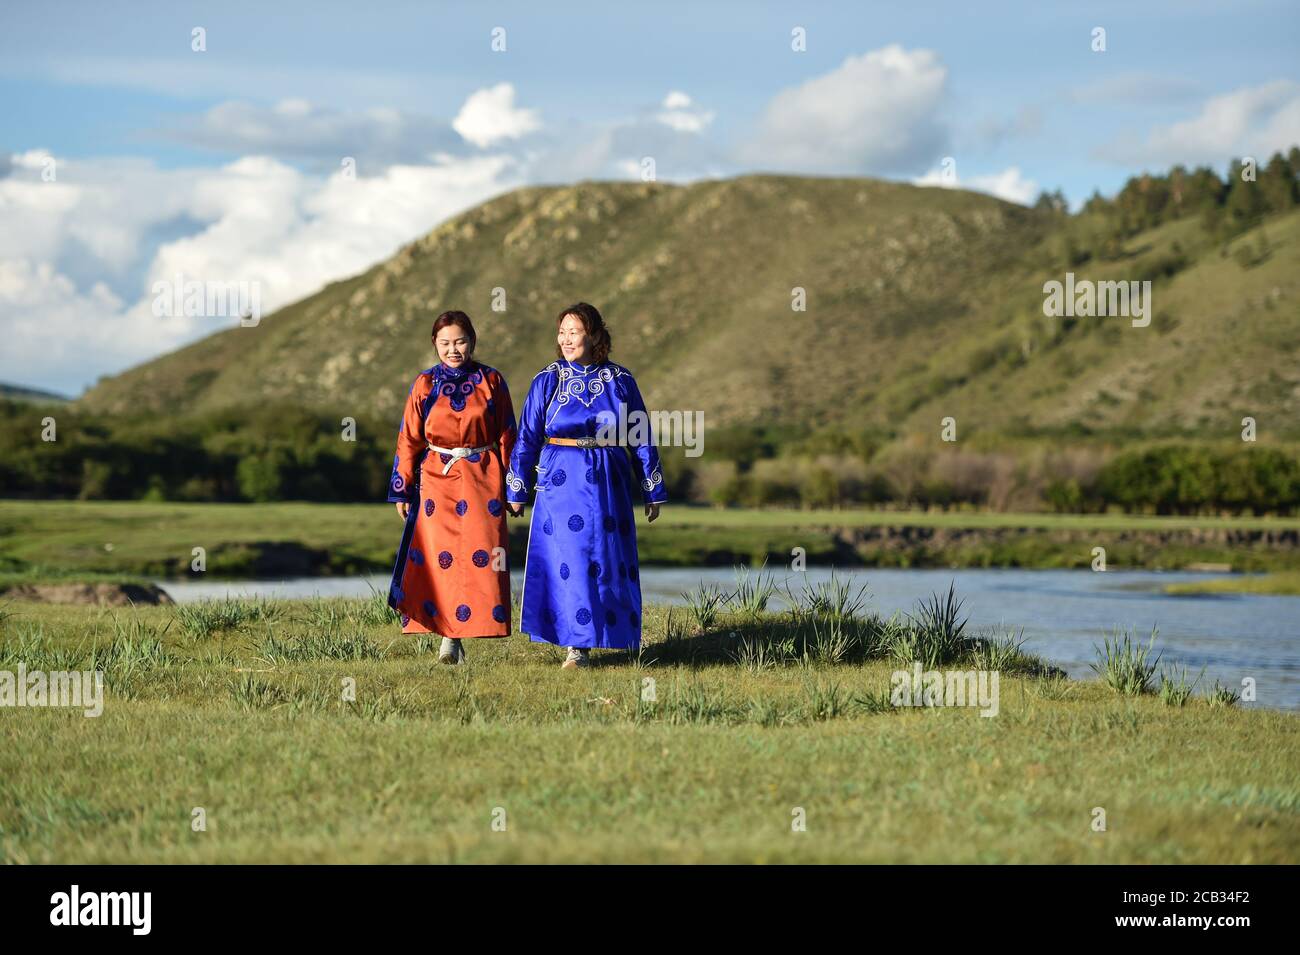 (200810) -- HULUN BUIR, Aug. 10, 2020 (Xinhua) -- Aijim (L) and her mother Uran walk along a river in Ewenki Autonomous Banner, north China's Inner Mongolia Autonomous Region, Aug. 6, 2020.  Aijim is a post-90s girl of Ewenki ethnic group living in Inner Mongolia Autonomous Region. In 2014, she returned to her hometown at Ewenki Autonomous Banner, Hulun Buir City, after graduation from university, and helped her mother Uran run a handicraft studio. They make handicrafts themed on 'Sun Flower', and opened up online business to sell the products.     'Behind the handicrafts we made is the folk s Stock Photo